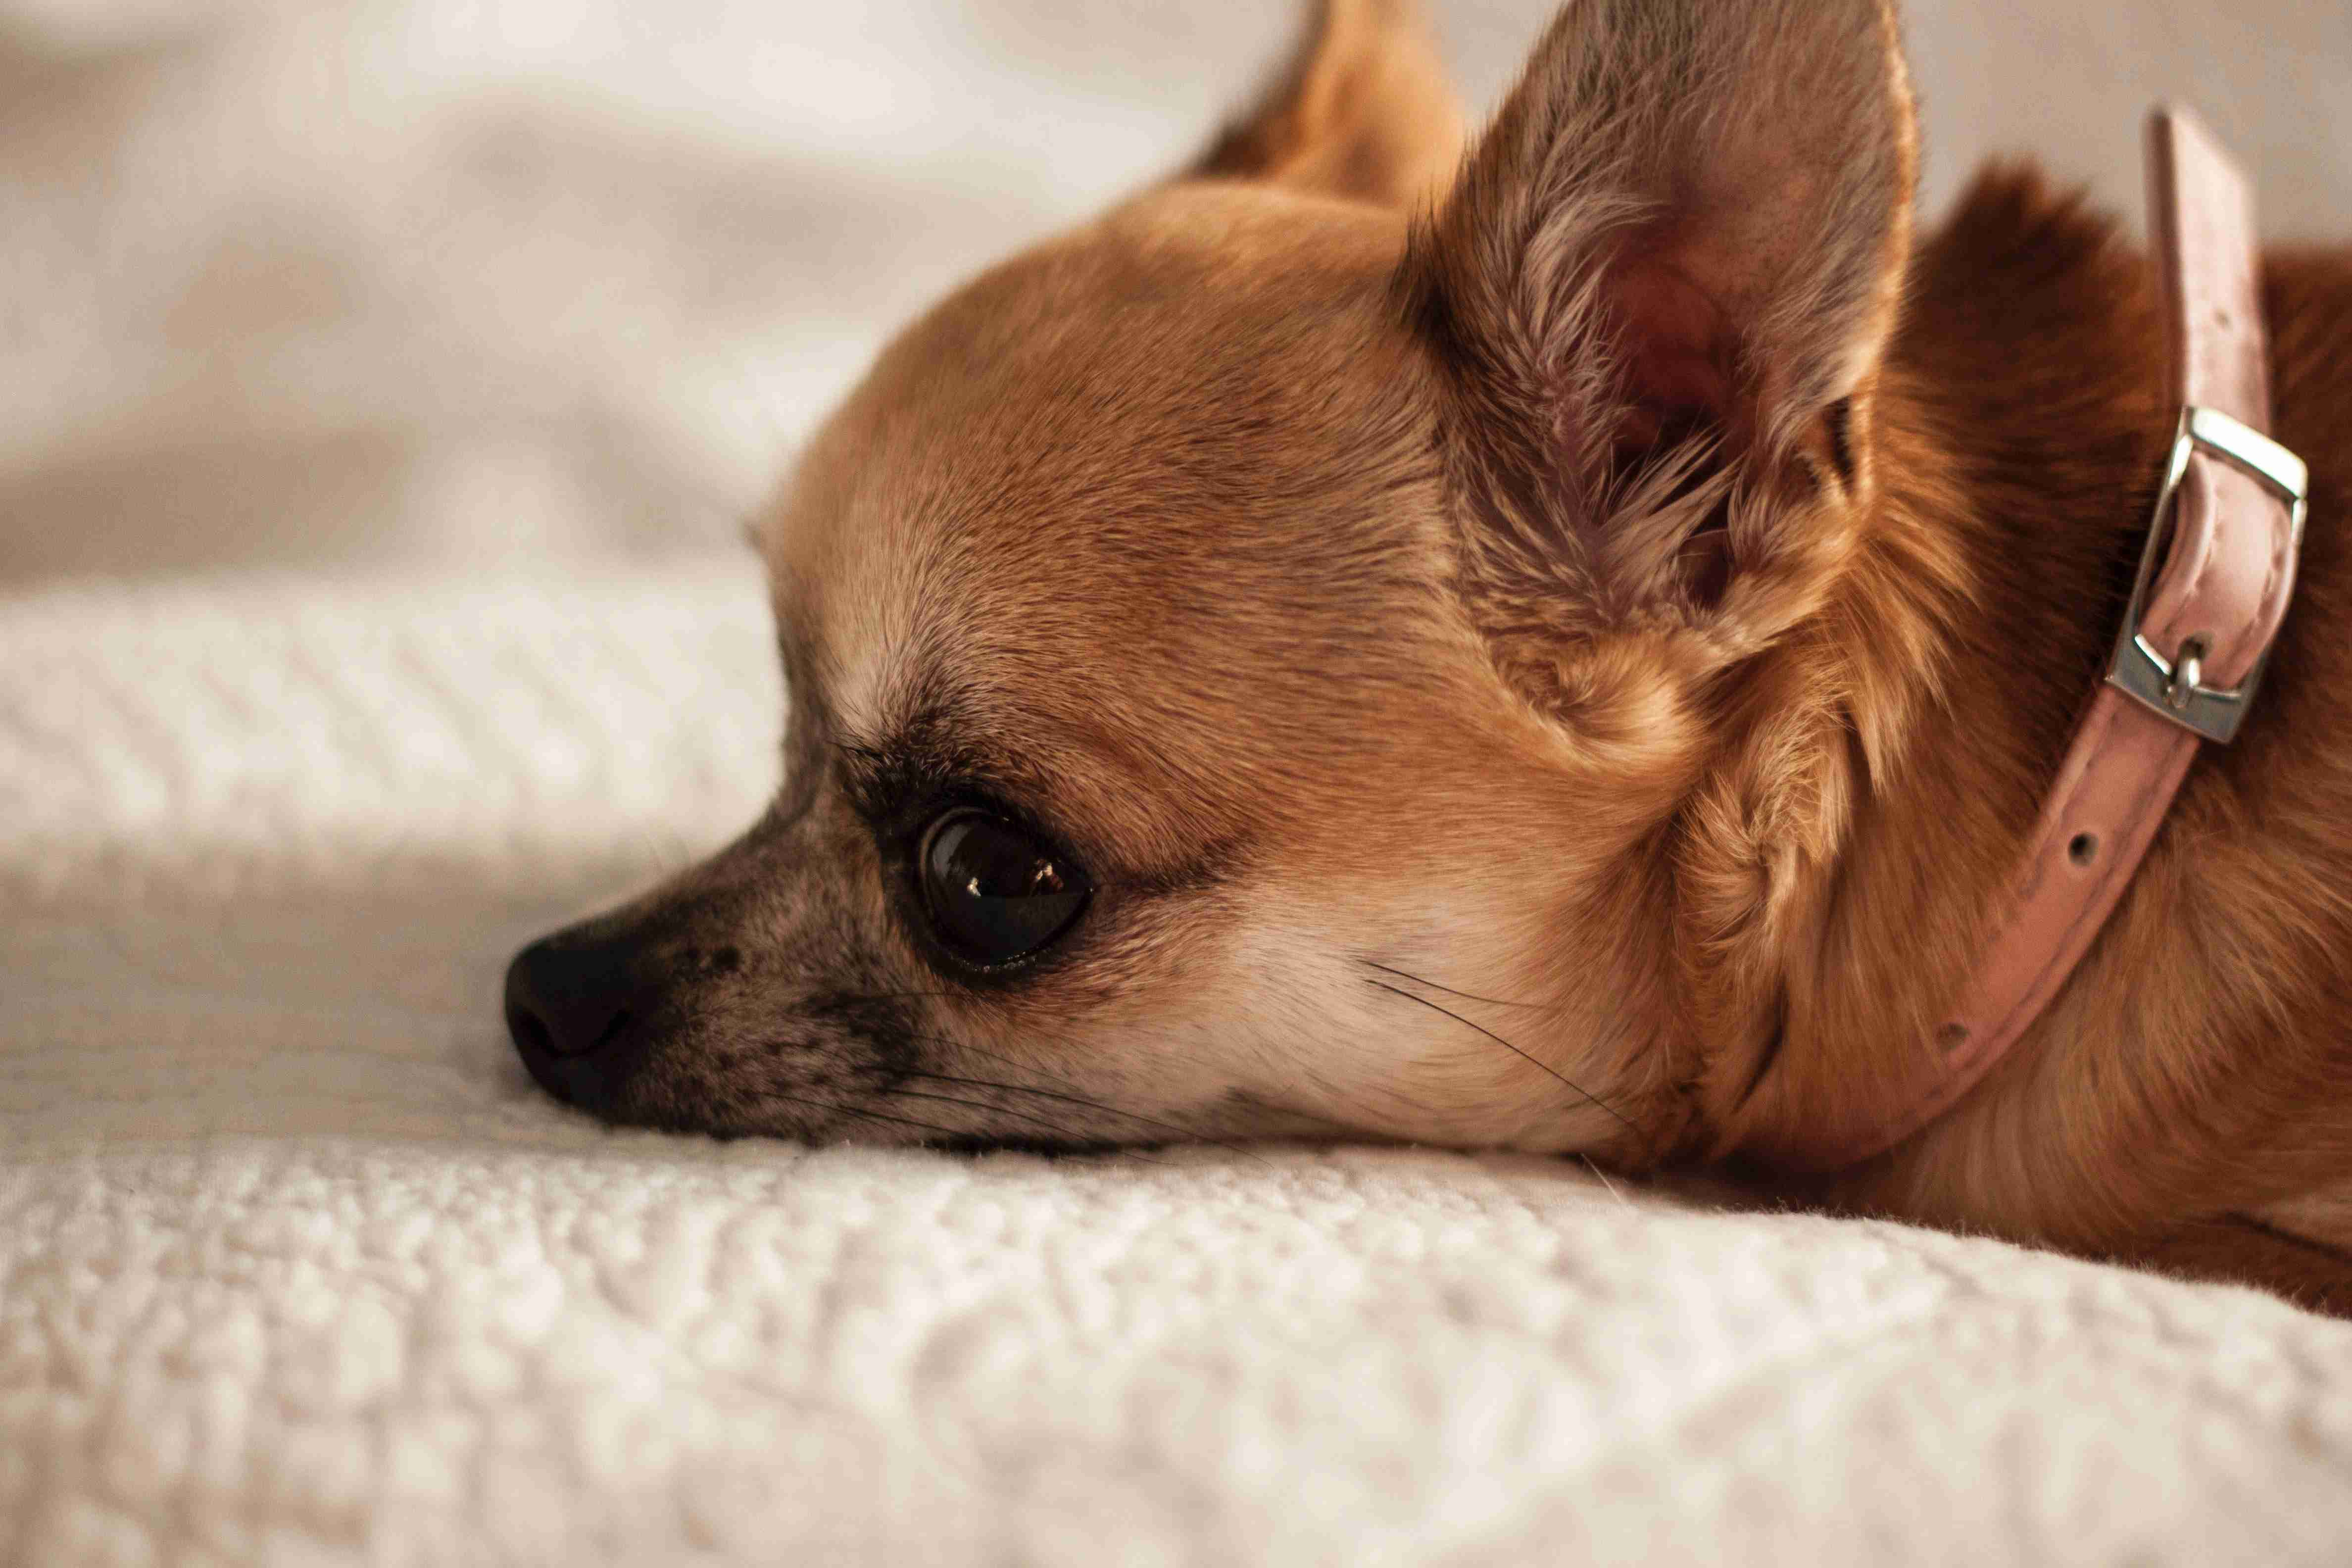 Can Chihuahuas become aggressive towards their owners when they are feeling sick or in pain?